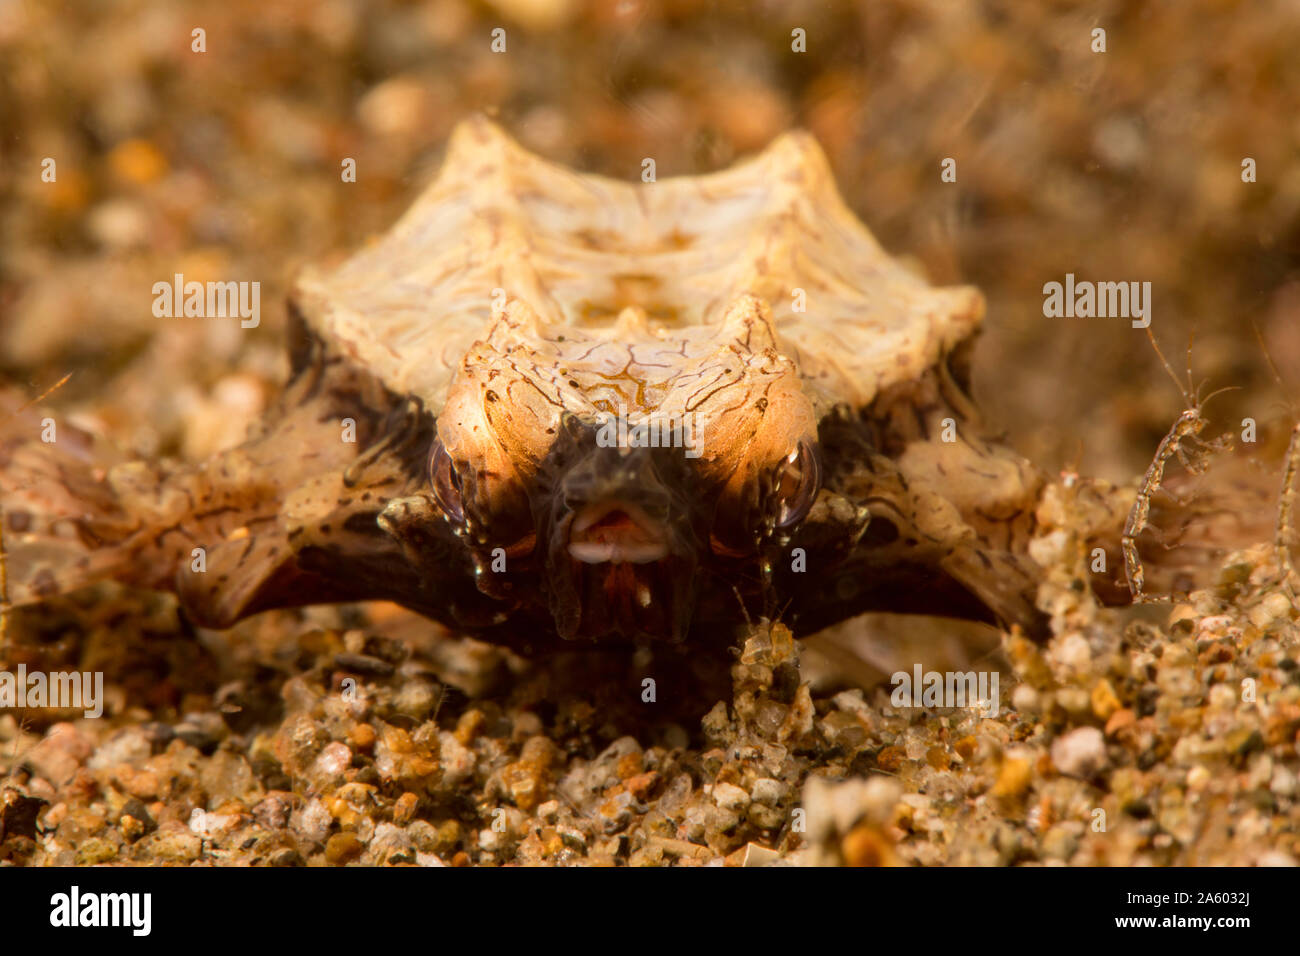 This is a close-up of a short dragonfish or Pegasus sea moth, Eurypegasus draconis, with a skeleton shrimp. It is just a few inches long. The blurry l Stock Photo